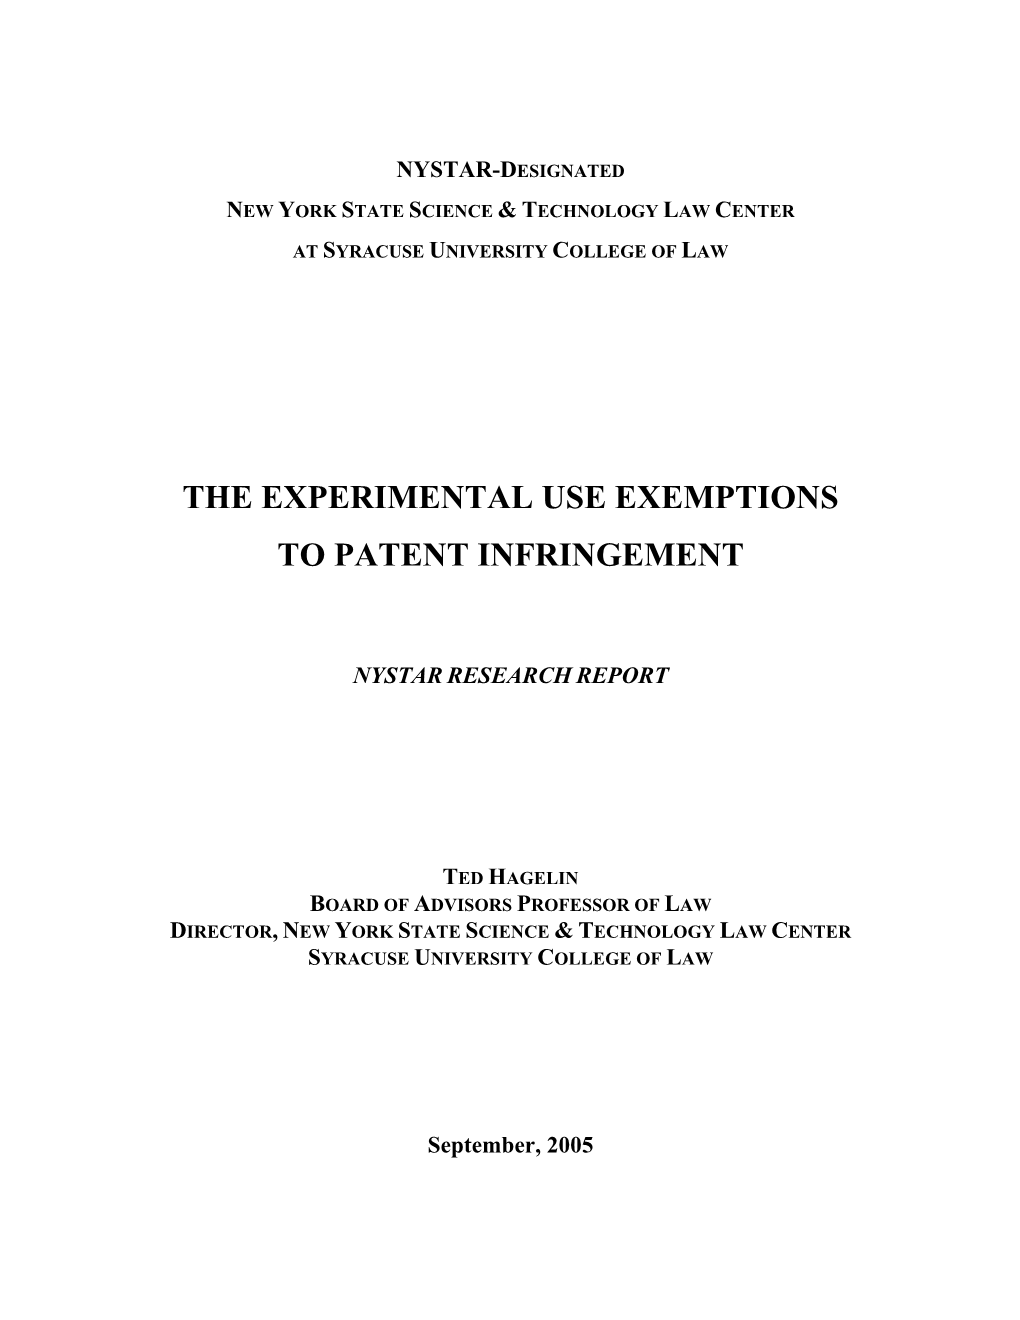 The Experimental Use Exemptions to Patent Infringement